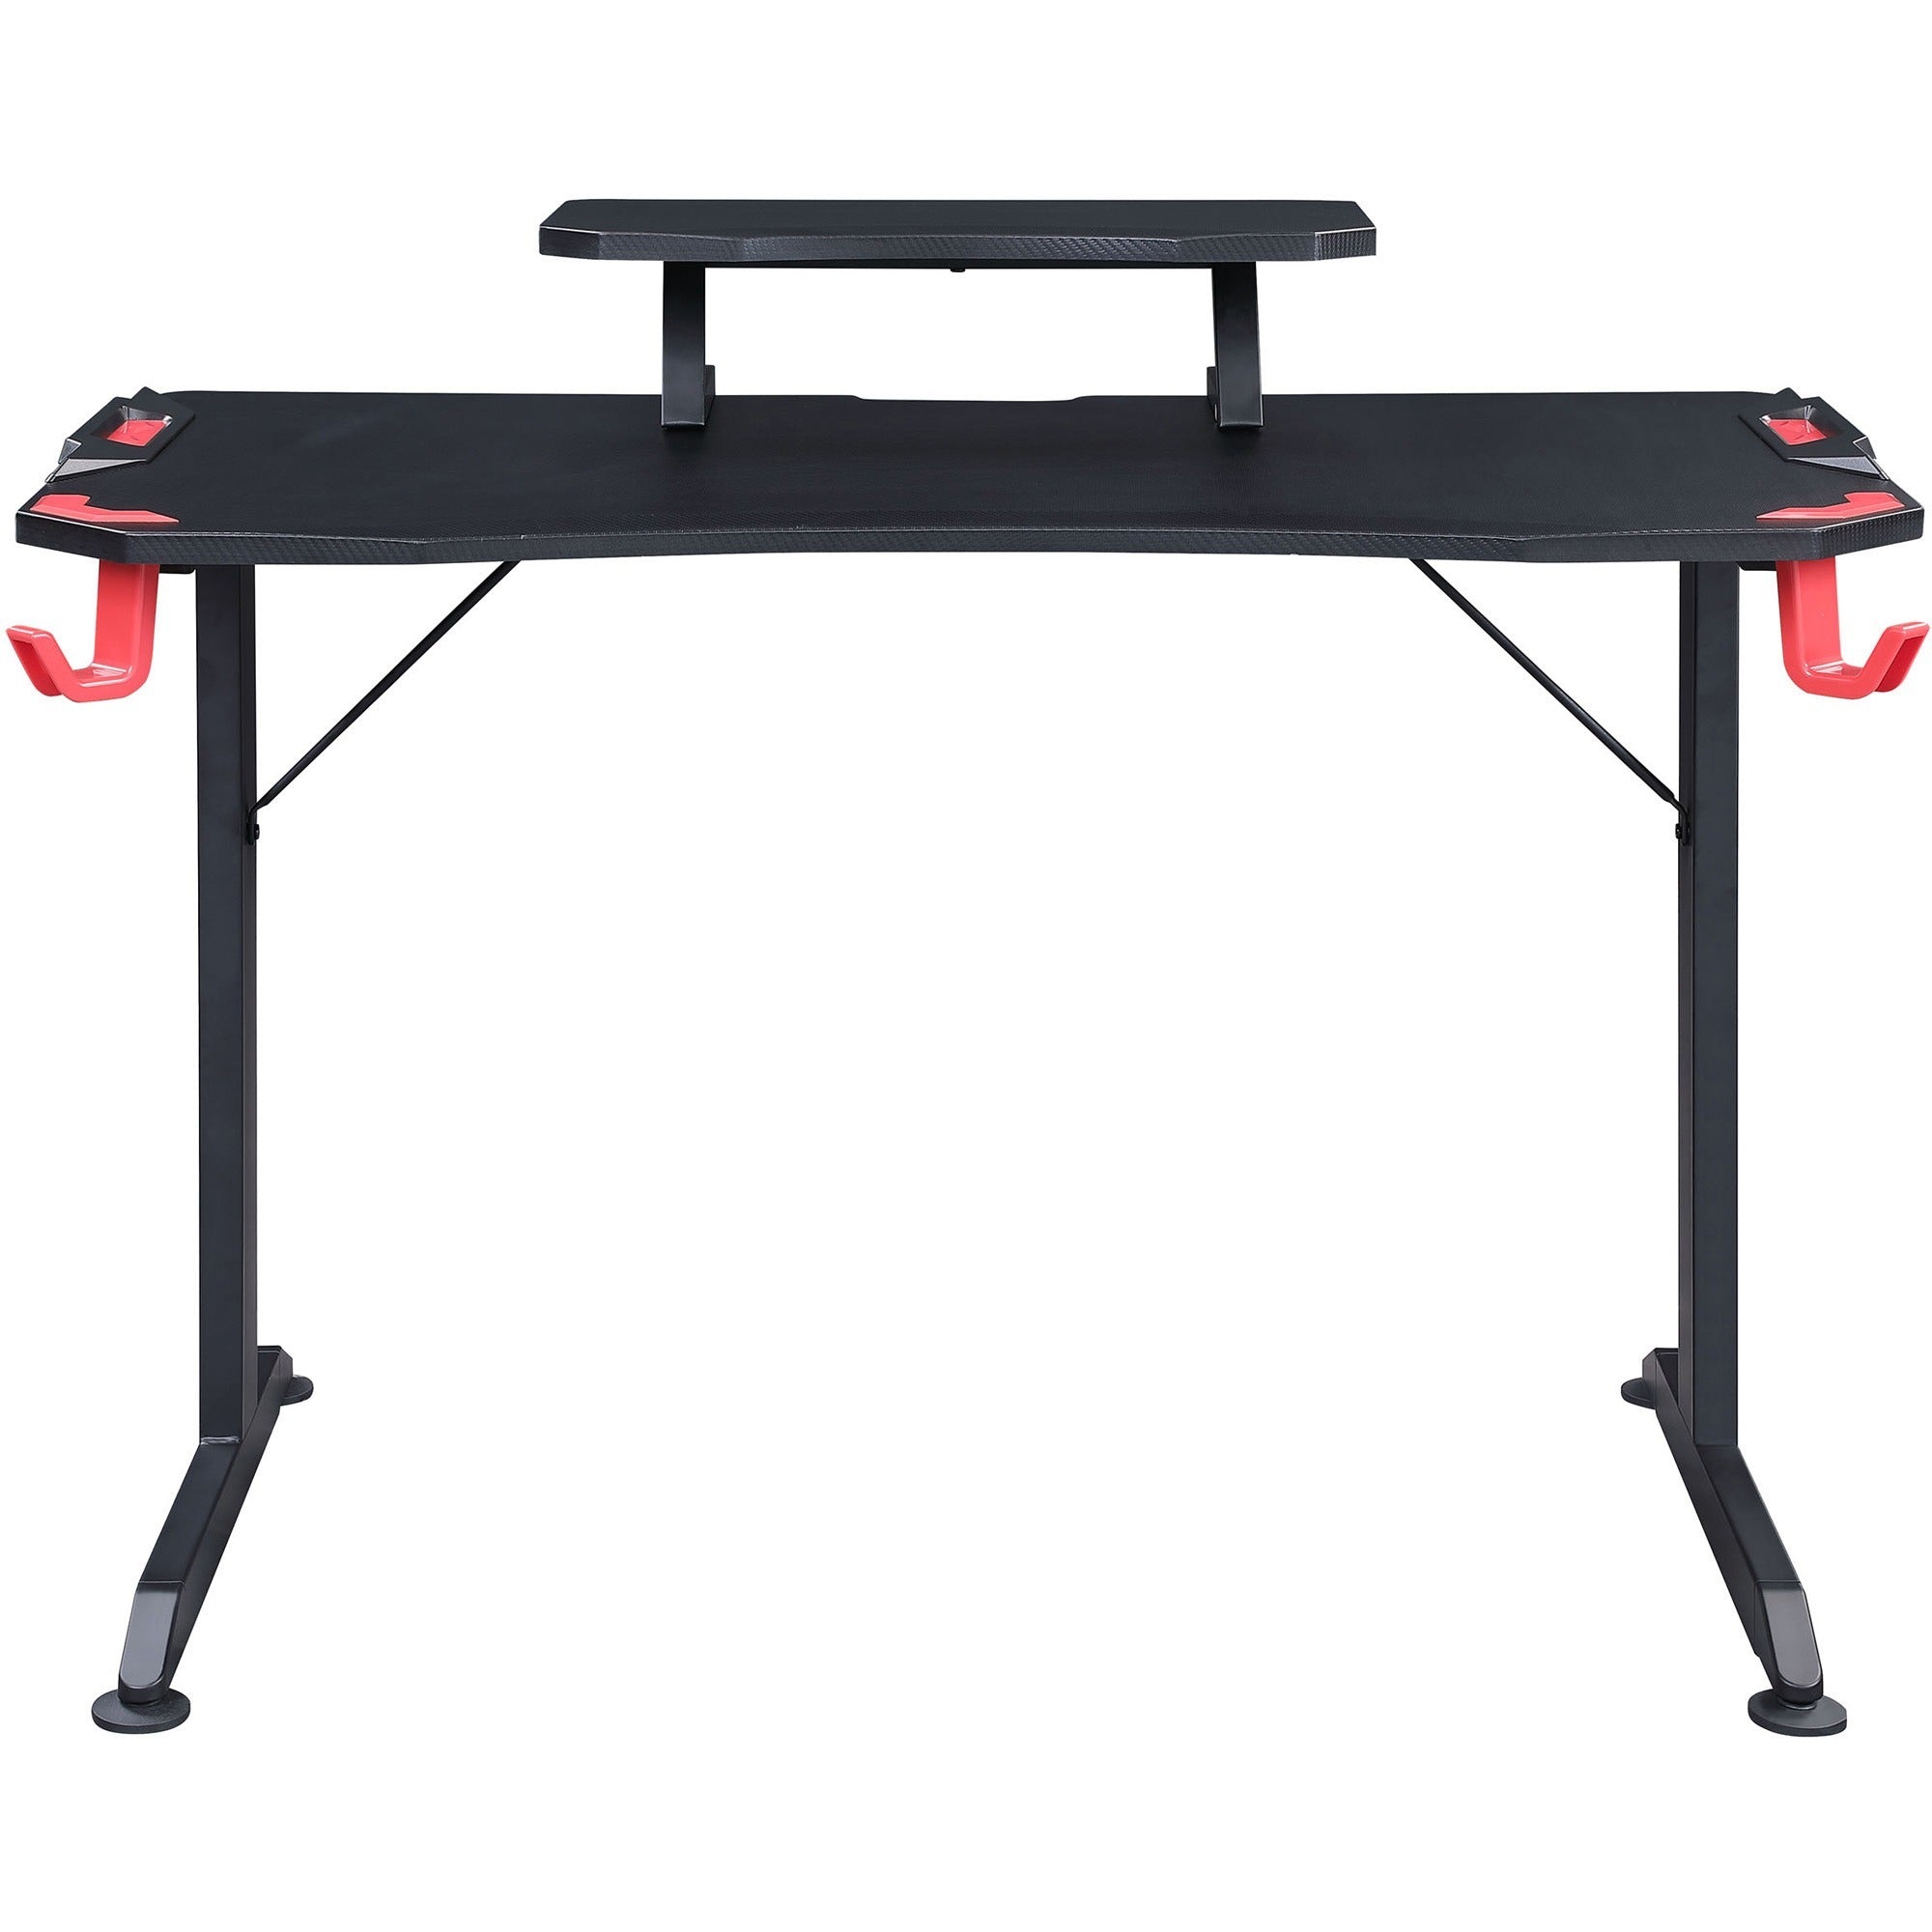 lorell-gaming-desk-powder-coated-base-127-lb-capacity-36-height-x-48-width-x-26-depth-assembly-required-black-1-each_llr84393 - 2